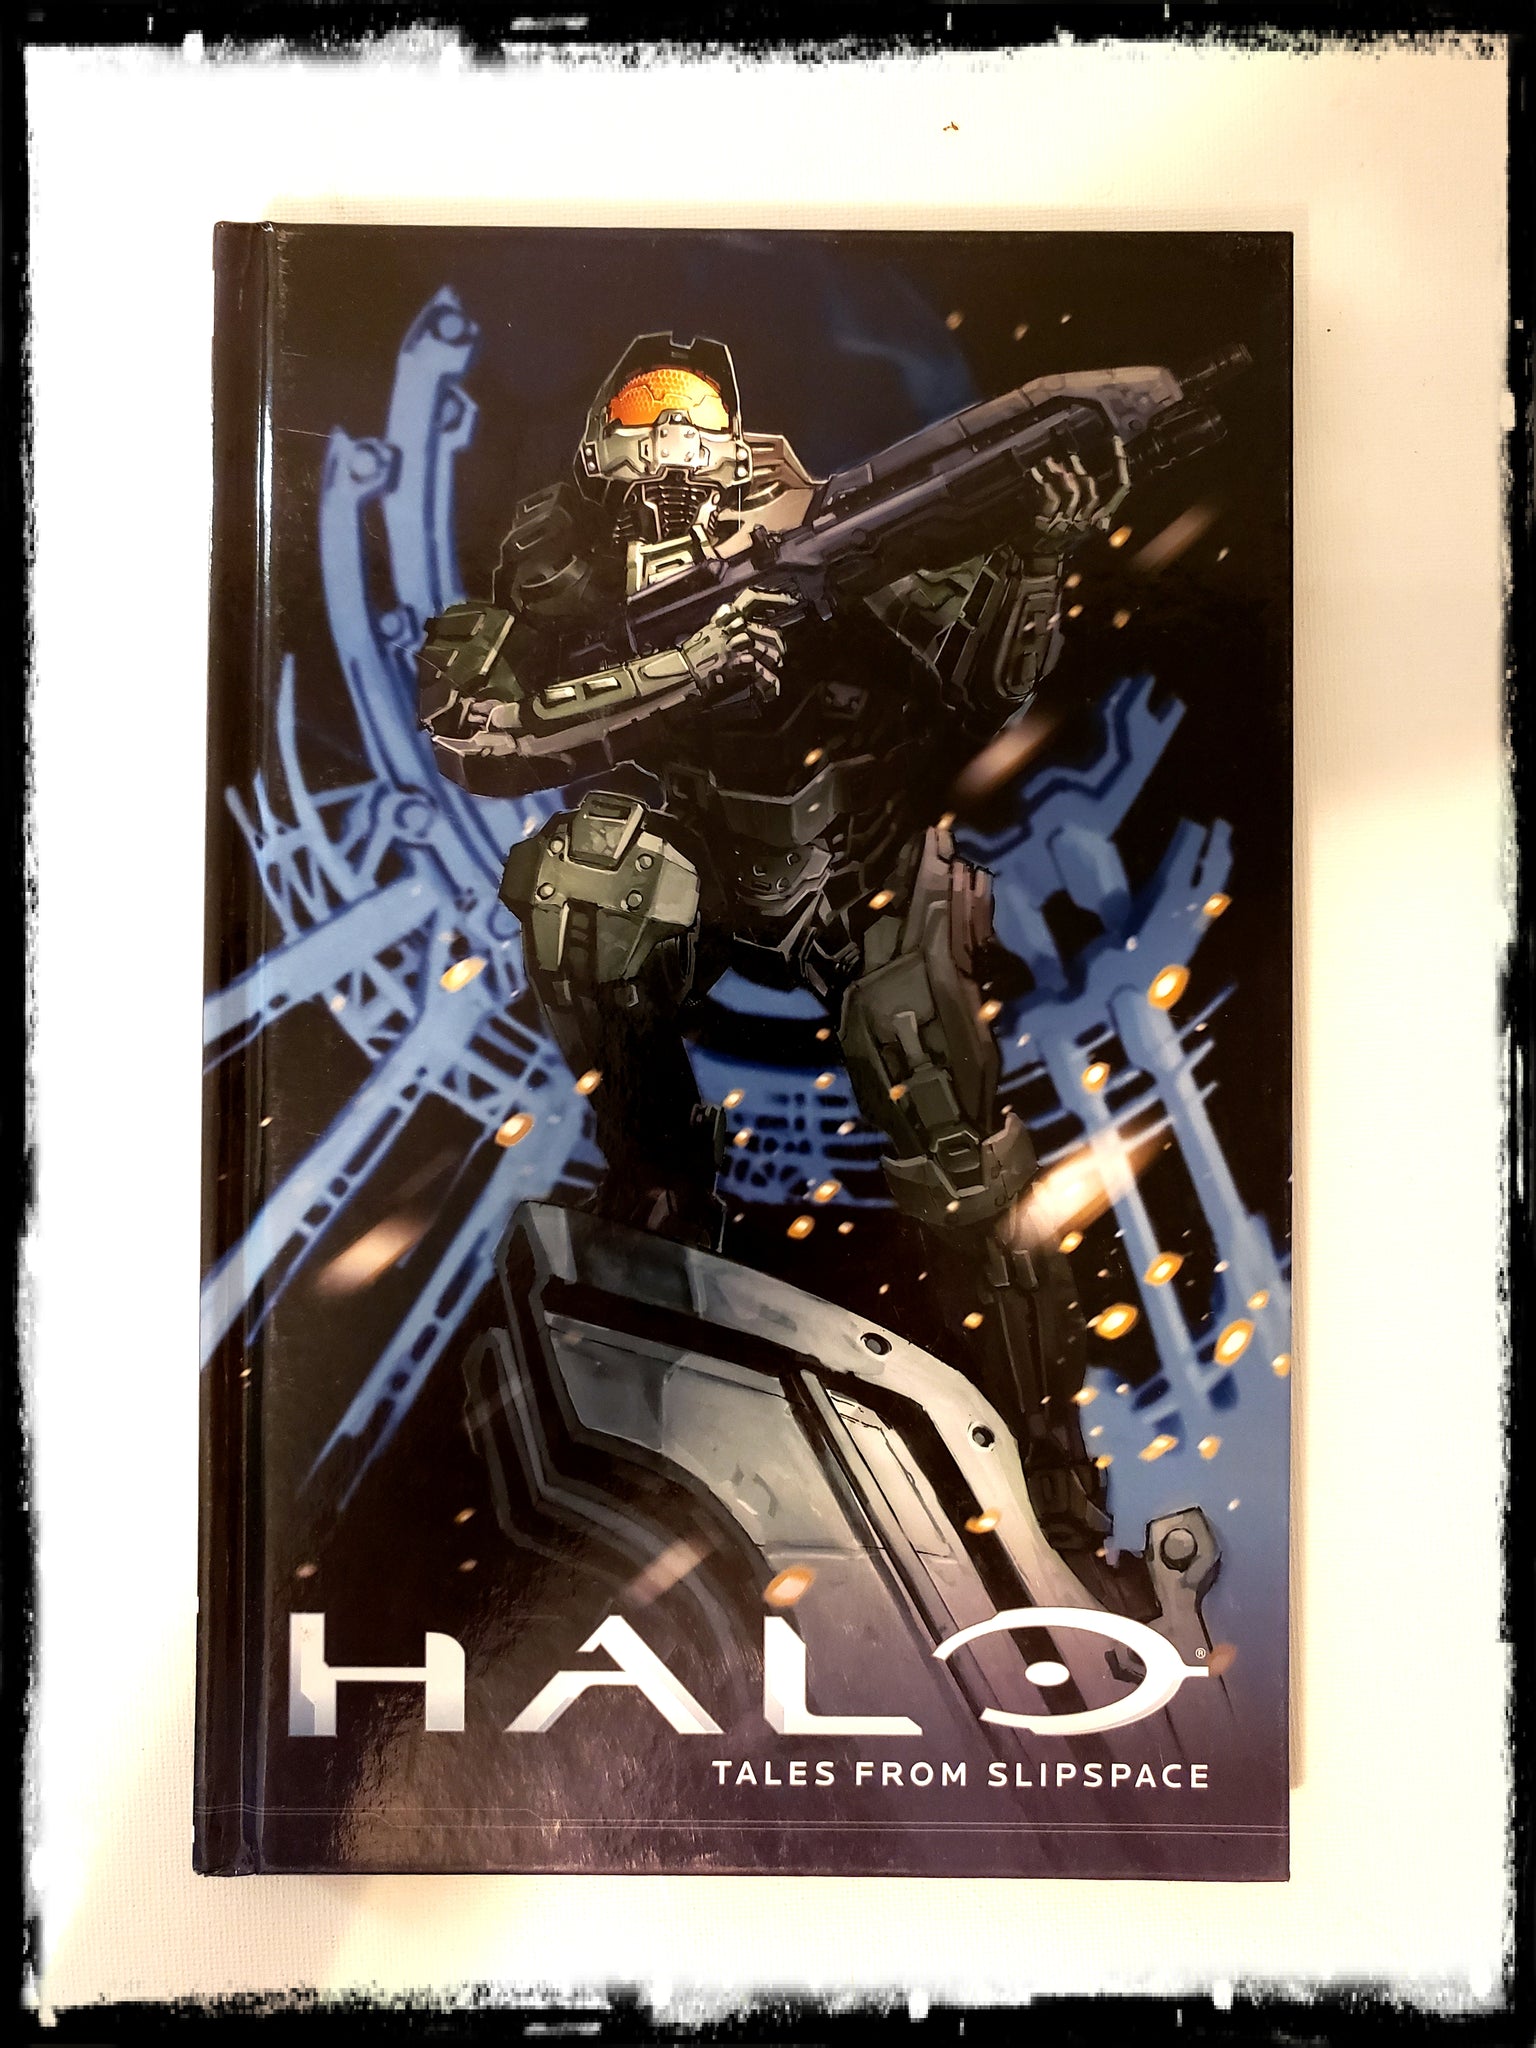 HALO: TALES FROM SLIPSPACE - 2016 HARDCOVER